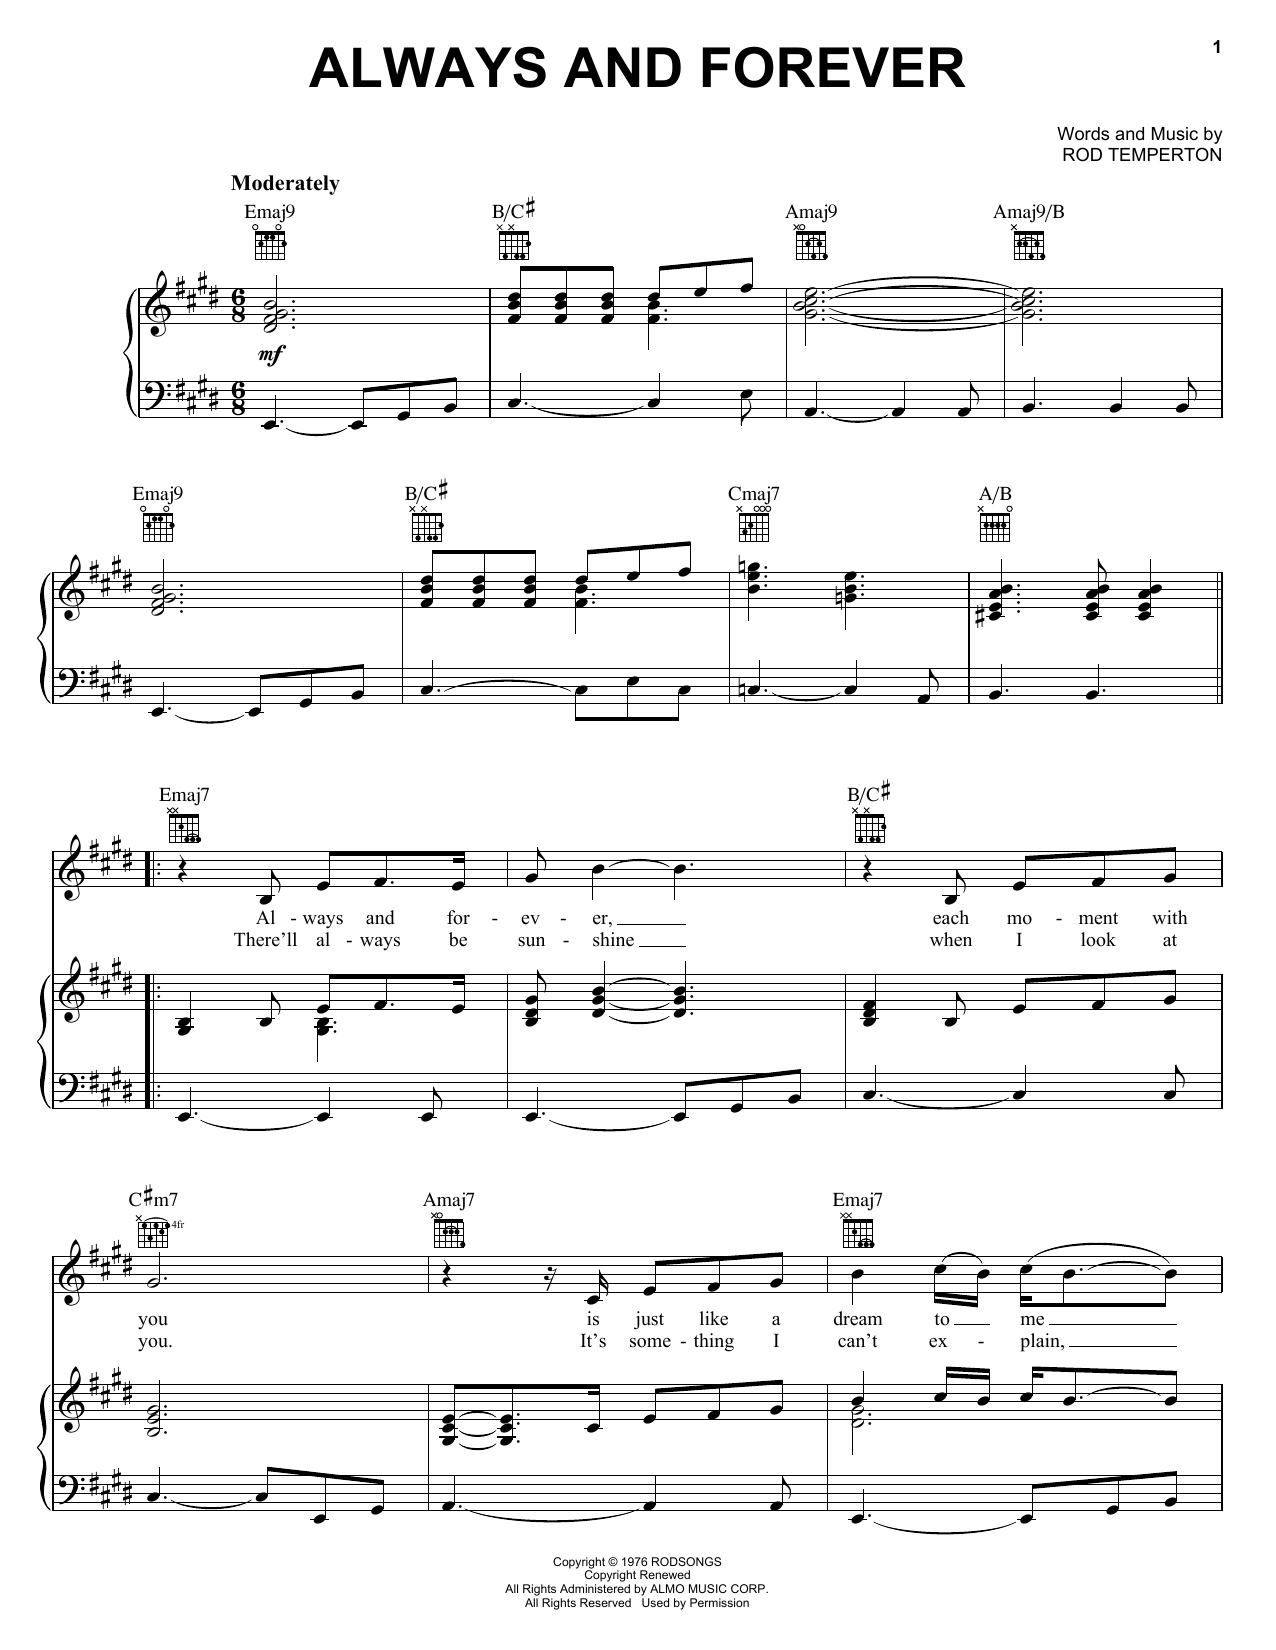 Heatwave Always And Forever sheet music notes and chords. Download Printable PDF.